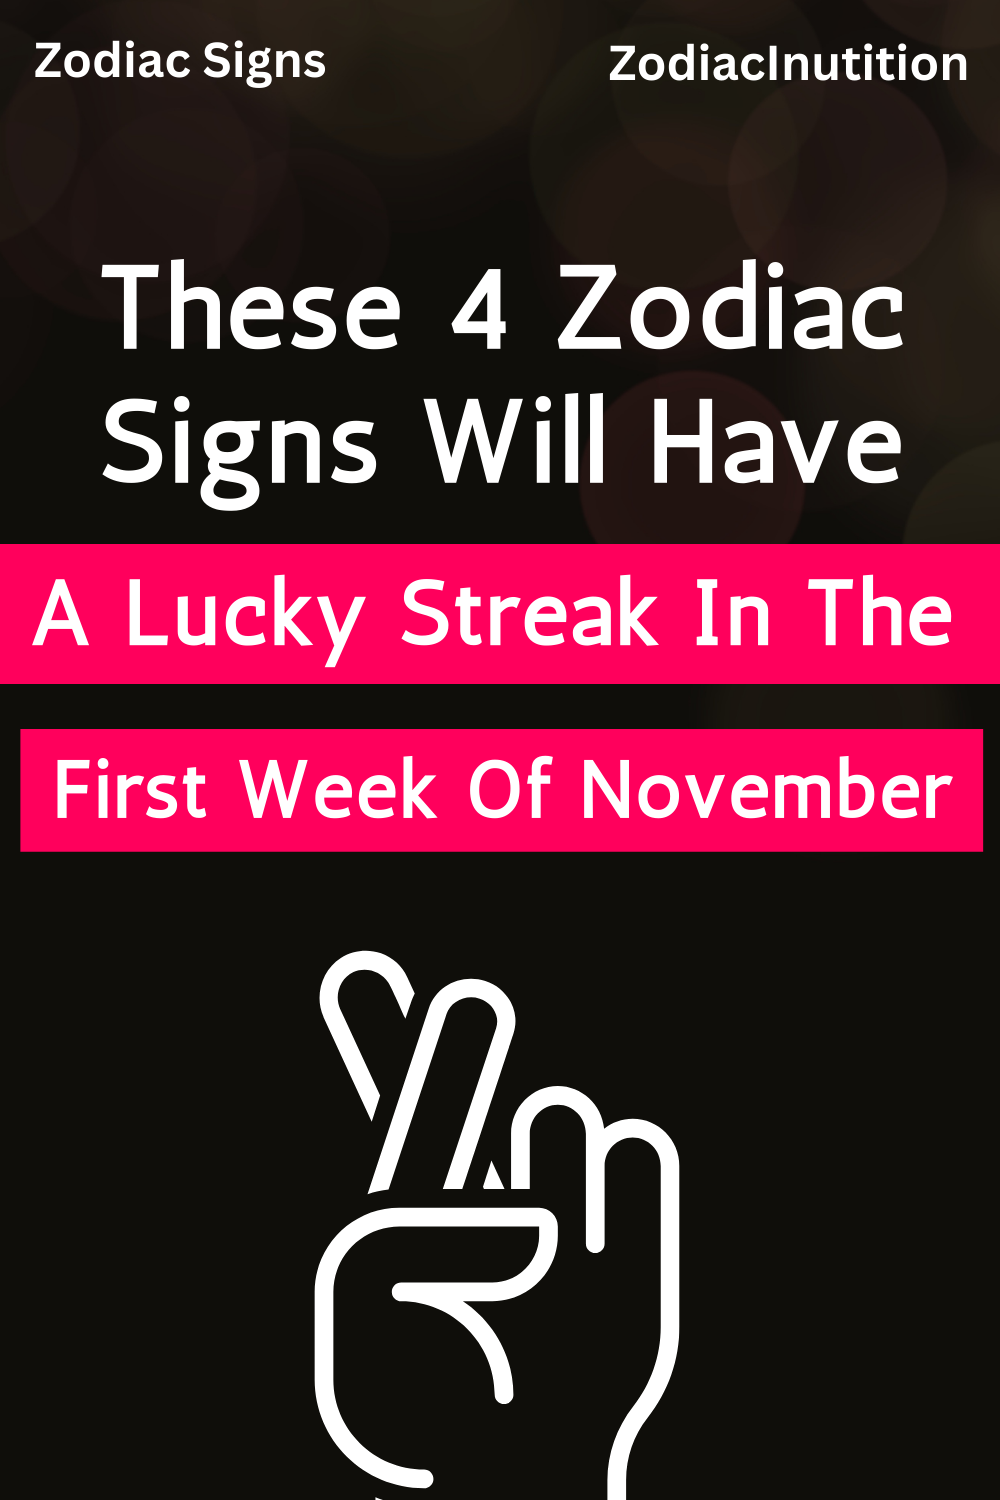 These 4 Zodiac Signs Will Have A Lucky Streak In The First Week Of November